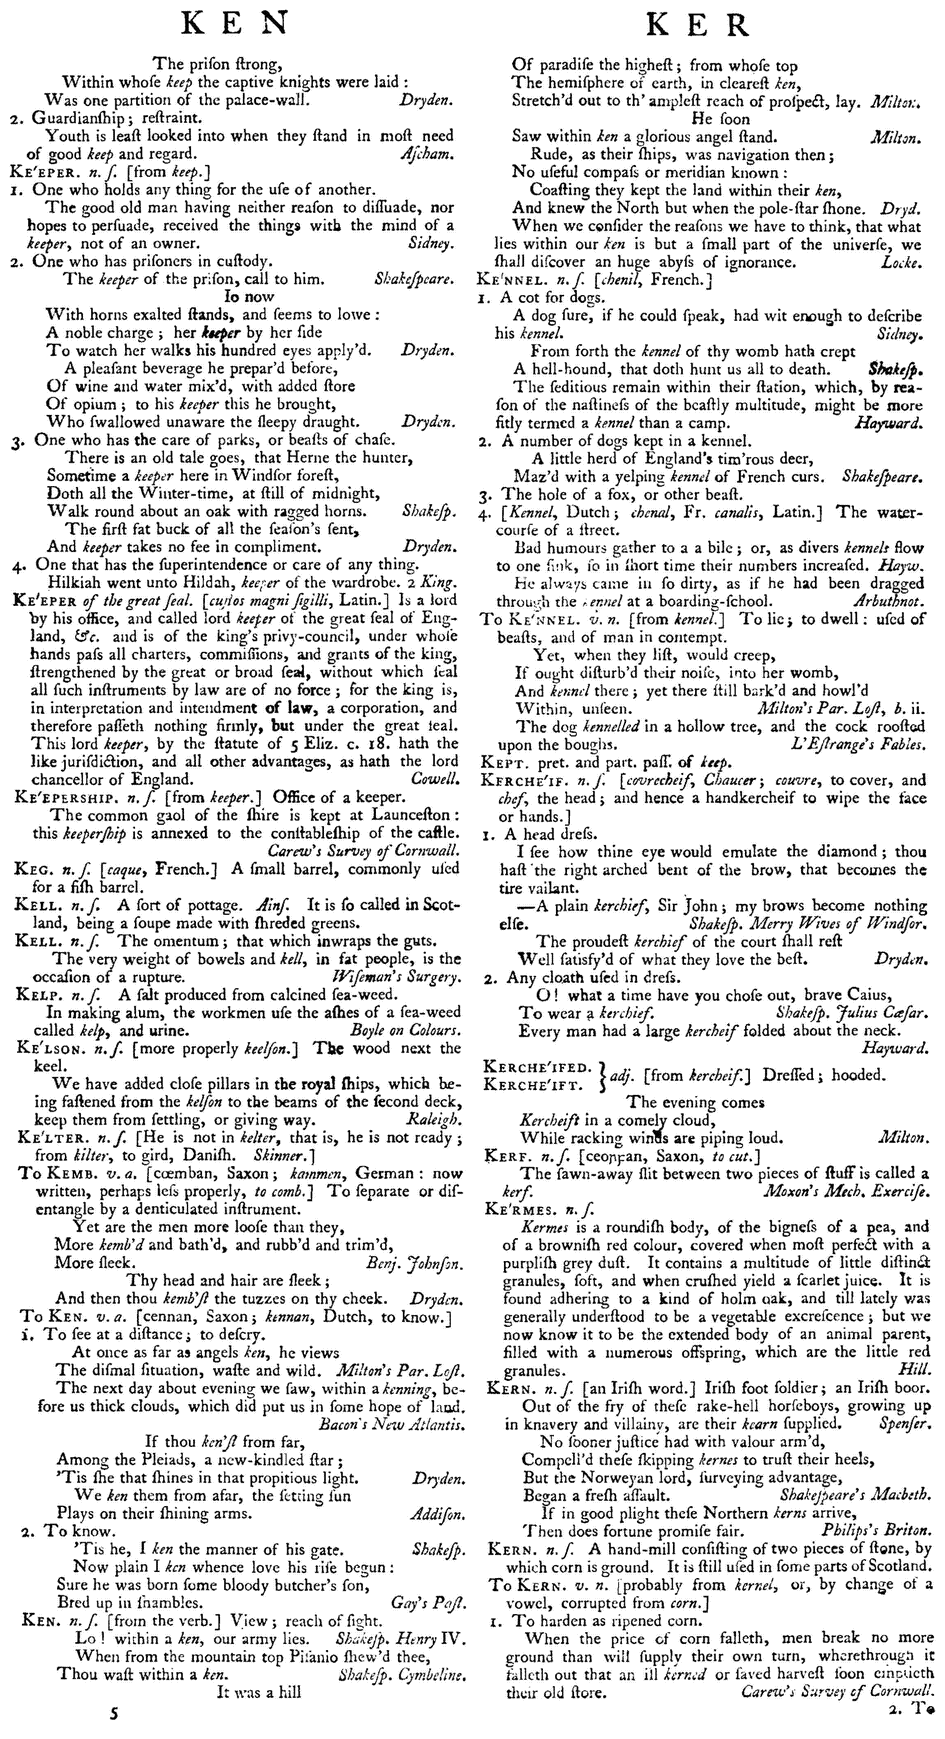 File:Page 1148 (A Dictionary of the English Language).gif